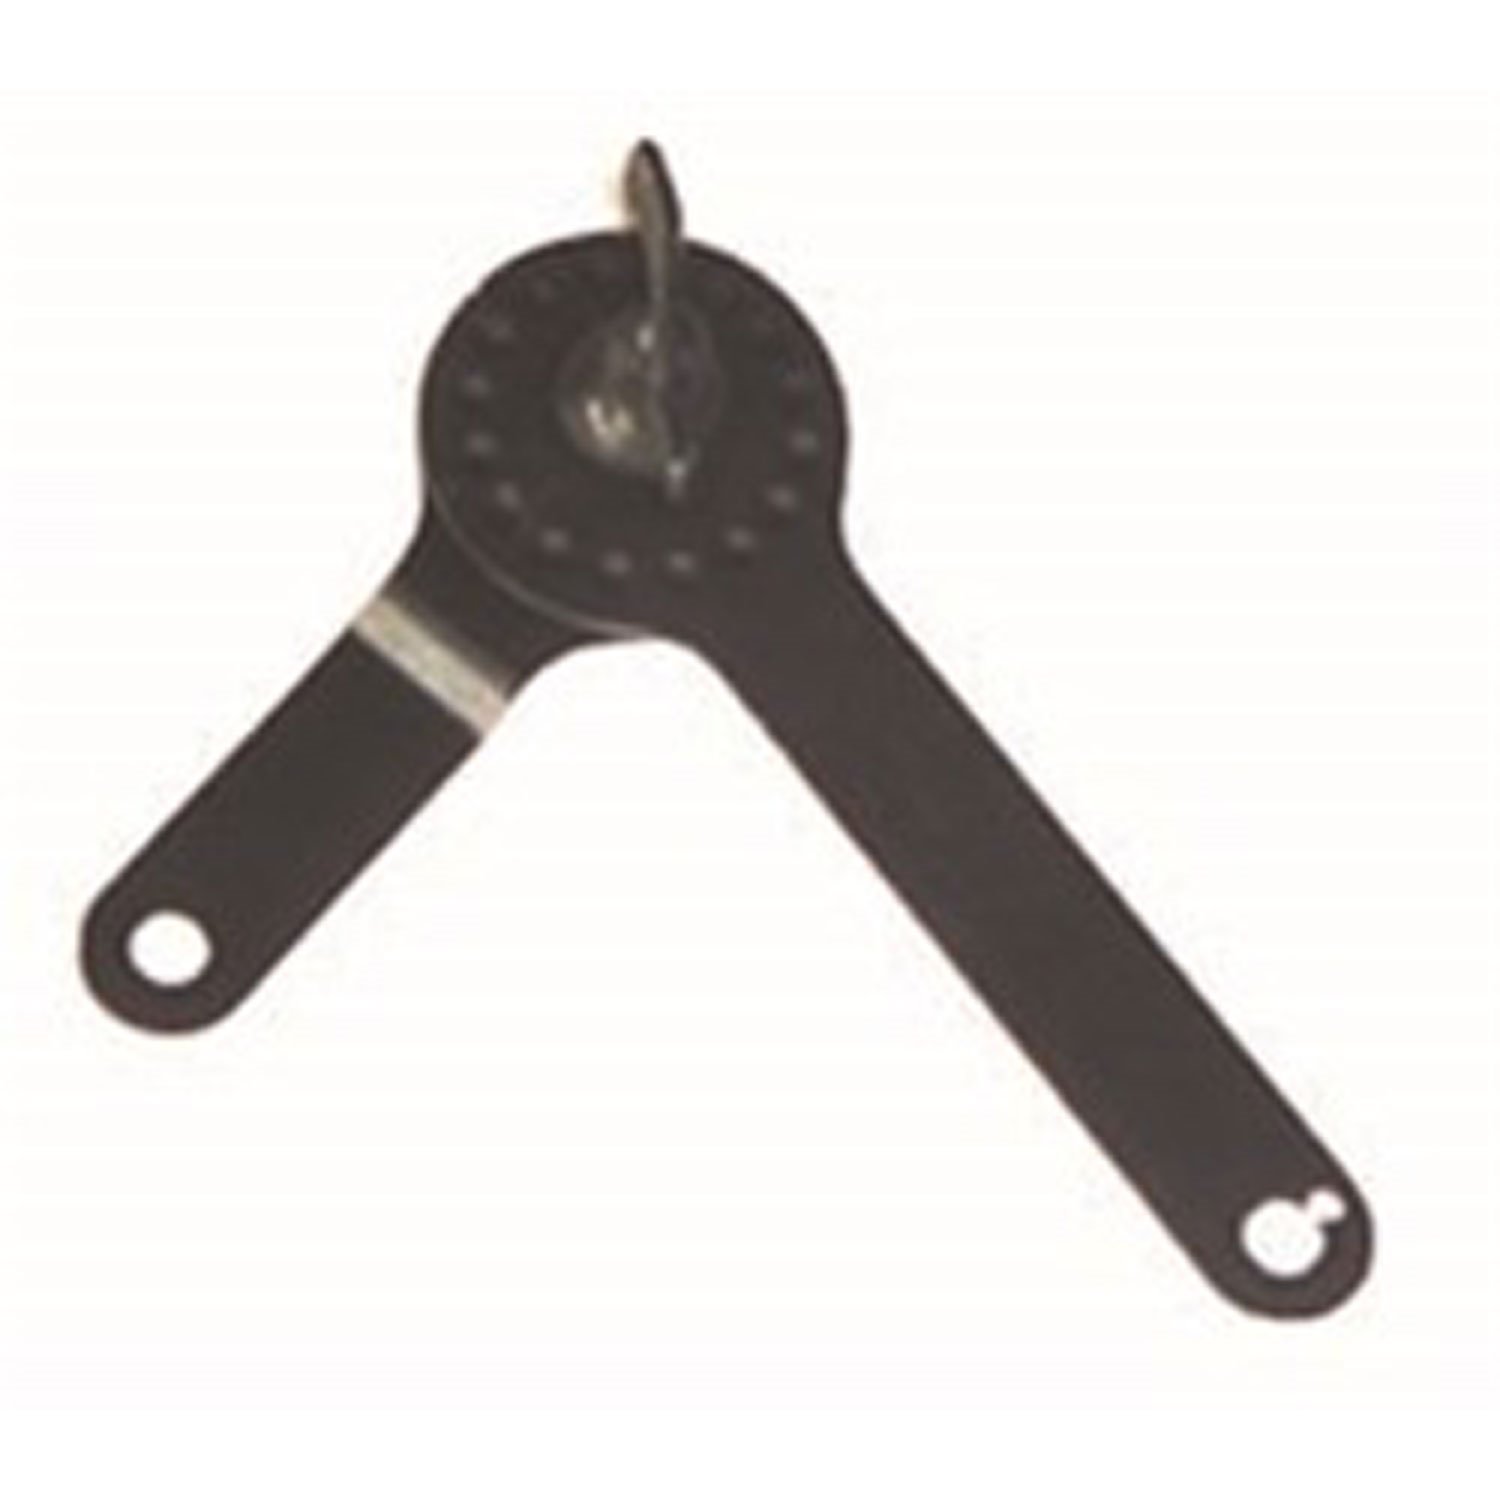 Replacement windshield adjusting arm assembly from Omix-ADA, Fits right side of windshield on 46-49 Willys CJ2A.